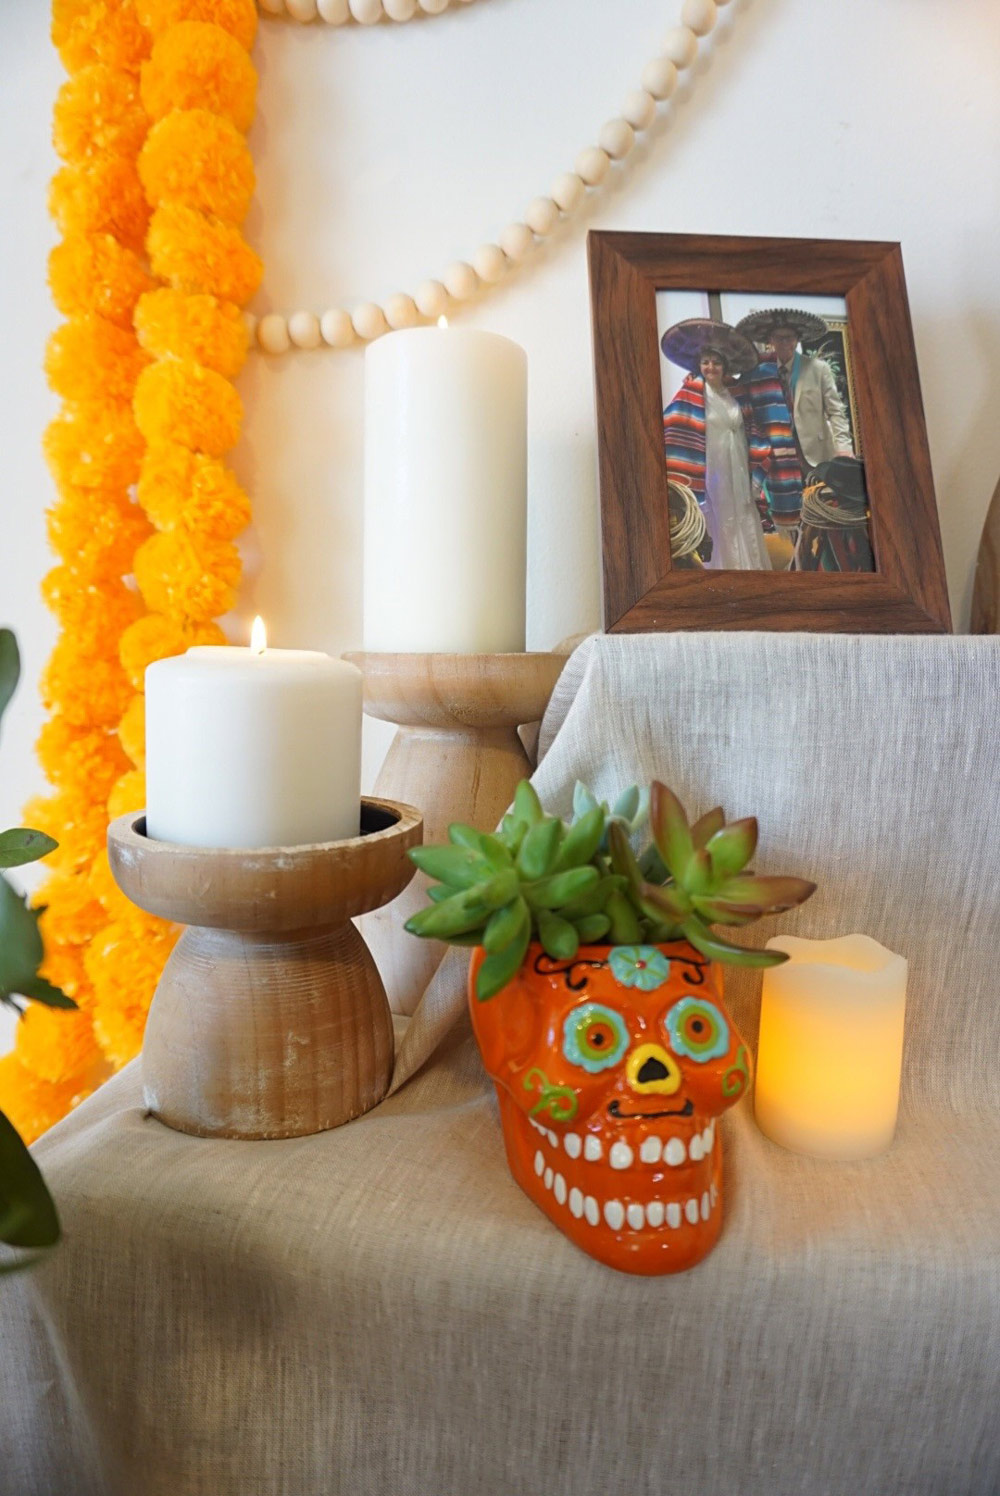 A closeup of details on Ofrenda, pictures, plants, and candles over a tablecloth.